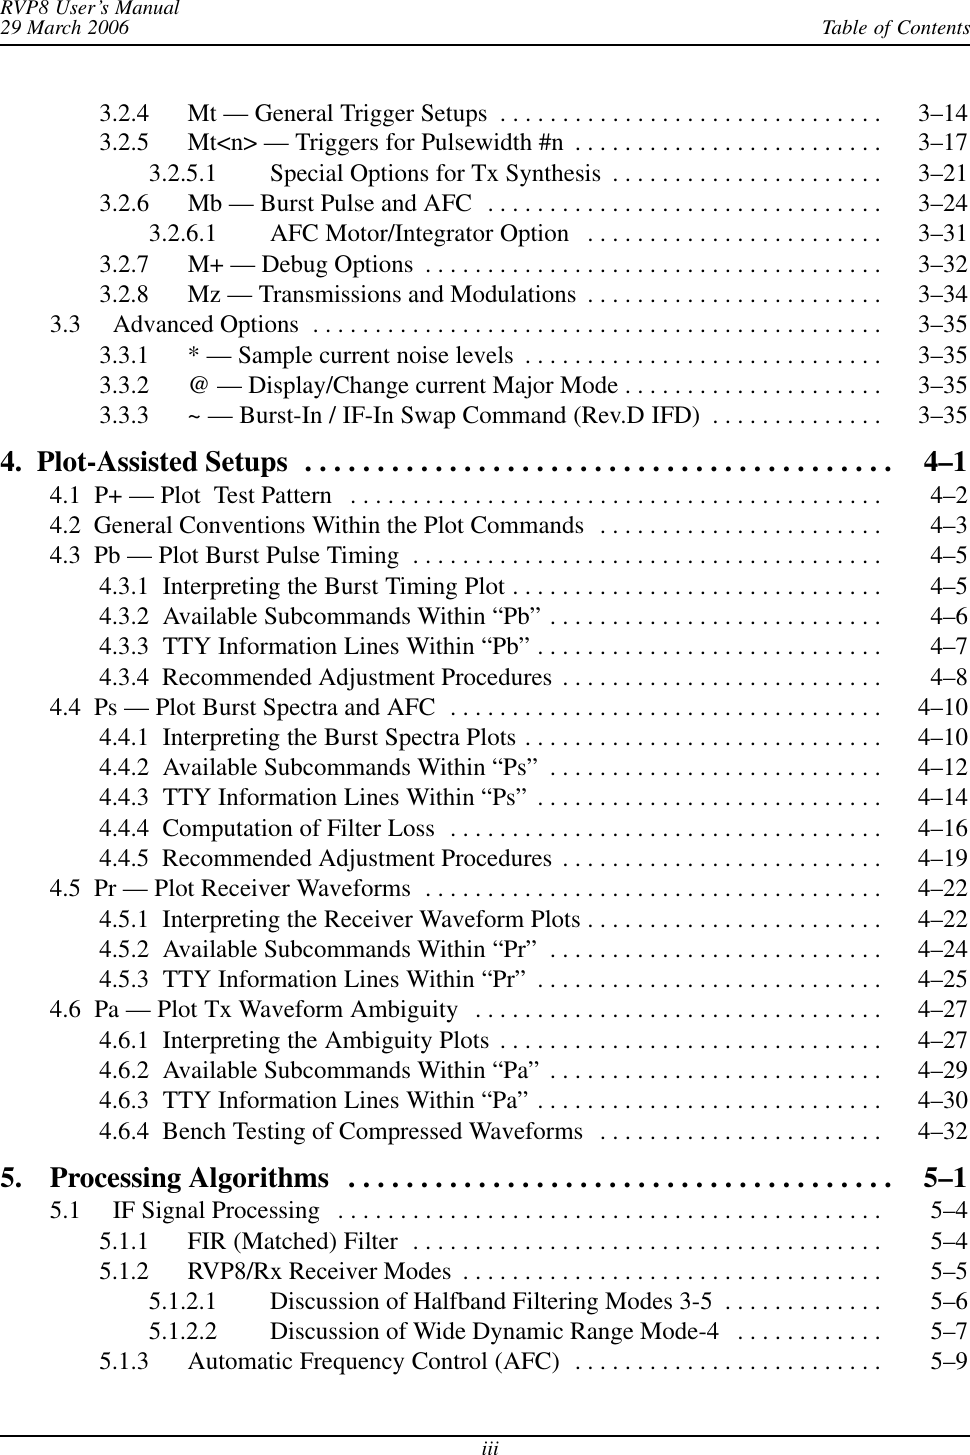 Table of ContentsRVP8 User’s Manual29 March 2006iii3.2.4 Mt — General Trigger Setups 3–14 . . . . . . . . . . . . . . . . . . . . . . . . . . . . . . . 3.2.5 Mt&lt;n&gt; — Triggers for Pulsewidth #n 3–17 . . . . . . . . . . . . . . . . . . . . . . . . . 3.2.5.1 Special Options for Tx Synthesis 3–21 . . . . . . . . . . . . . . . . . . . . . . 3.2.6 Mb — Burst Pulse and AFC 3–24 . . . . . . . . . . . . . . . . . . . . . . . . . . . . . . . . 3.2.6.1 AFC Motor/Integrator Option 3–31 . . . . . . . . . . . . . . . . . . . . . . . . 3.2.7 M+ — Debug Options 3–32 . . . . . . . . . . . . . . . . . . . . . . . . . . . . . . . . . . . . . 3.2.8 Mz — Transmissions and Modulations 3–34 . . . . . . . . . . . . . . . . . . . . . . . . 3.3 Advanced Options 3–35 . . . . . . . . . . . . . . . . . . . . . . . . . . . . . . . . . . . . . . . . . . . . . . 3.3.1 * — Sample current noise levels 3–35 . . . . . . . . . . . . . . . . . . . . . . . . . . . . . 3.3.2 @ — Display/Change current Major Mode 3–35 . . . . . . . . . . . . . . . . . . . . . 3.3.3 ~ — Burst-In / IF-In Swap Command (Rev.D IFD) 3–35 . . . . . . . . . . . . . . 4.  Plot-Assisted Setups 4–1 . . . . . . . . . . . . . . . . . . . . . . . . . . . . . . . . . . . . . . . . . 4.1  P+ — Plot  Test Pattern 4–2 . . . . . . . . . . . . . . . . . . . . . . . . . . . . . . . . . . . . . . . . . . . 4.2  General Conventions Within the Plot Commands 4–3 . . . . . . . . . . . . . . . . . . . . . . . 4.3  Pb — Plot Burst Pulse Timing 4–5 . . . . . . . . . . . . . . . . . . . . . . . . . . . . . . . . . . . . . . 4.3.1  Interpreting the Burst Timing Plot 4–5 . . . . . . . . . . . . . . . . . . . . . . . . . . . . . . 4.3.2  Available Subcommands Within “Pb” 4–6 . . . . . . . . . . . . . . . . . . . . . . . . . . . 4.3.3  TTY Information Lines Within “Pb” 4–7 . . . . . . . . . . . . . . . . . . . . . . . . . . . . 4.3.4  Recommended Adjustment Procedures 4–8 . . . . . . . . . . . . . . . . . . . . . . . . . . 4.4  Ps — Plot Burst Spectra and AFC 4–10 . . . . . . . . . . . . . . . . . . . . . . . . . . . . . . . . . . . 4.4.1  Interpreting the Burst Spectra Plots 4–10 . . . . . . . . . . . . . . . . . . . . . . . . . . . . . 4.4.2  Available Subcommands Within “Ps” 4–12 . . . . . . . . . . . . . . . . . . . . . . . . . . . 4.4.3  TTY Information Lines Within “Ps” 4–14 . . . . . . . . . . . . . . . . . . . . . . . . . . . . 4.4.4  Computation of Filter Loss 4–16 . . . . . . . . . . . . . . . . . . . . . . . . . . . . . . . . . . . 4.4.5  Recommended Adjustment Procedures 4–19 . . . . . . . . . . . . . . . . . . . . . . . . . . 4.5  Pr — Plot Receiver Waveforms 4–22 . . . . . . . . . . . . . . . . . . . . . . . . . . . . . . . . . . . . . 4.5.1  Interpreting the Receiver Waveform Plots 4–22 . . . . . . . . . . . . . . . . . . . . . . . . 4.5.2  Available Subcommands Within “Pr” 4–24 . . . . . . . . . . . . . . . . . . . . . . . . . . . 4.5.3  TTY Information Lines Within “Pr” 4–25 . . . . . . . . . . . . . . . . . . . . . . . . . . . . 4.6  Pa — Plot Tx Waveform Ambiguity 4–27 . . . . . . . . . . . . . . . . . . . . . . . . . . . . . . . . . 4.6.1  Interpreting the Ambiguity Plots 4–27 . . . . . . . . . . . . . . . . . . . . . . . . . . . . . . . 4.6.2  Available Subcommands Within “Pa” 4–29 . . . . . . . . . . . . . . . . . . . . . . . . . . . 4.6.3  TTY Information Lines Within “Pa” 4–30 . . . . . . . . . . . . . . . . . . . . . . . . . . . . 4.6.4  Bench Testing of Compressed Waveforms 4–32 . . . . . . . . . . . . . . . . . . . . . . . 5. Processing Algorithms 5–1 . . . . . . . . . . . . . . . . . . . . . . . . . . . . . . . . . . . . . . 5.1 IF Signal Processing 5–4 . . . . . . . . . . . . . . . . . . . . . . . . . . . . . . . . . . . . . . . . . . . . 5.1.1 FIR (Matched) Filter 5–4 . . . . . . . . . . . . . . . . . . . . . . . . . . . . . . . . . . . . . . 5.1.2 RVP8/Rx Receiver Modes 5–5 . . . . . . . . . . . . . . . . . . . . . . . . . . . . . . . . . . 5.1.2.1 Discussion of Halfband Filtering Modes 3-5 5–6 . . . . . . . . . . . . . 5.1.2.2 Discussion of Wide Dynamic Range Mode-4 5–7 . . . . . . . . . . . . 5.1.3 Automatic Frequency Control (AFC) 5–9 . . . . . . . . . . . . . . . . . . . . . . . . . 